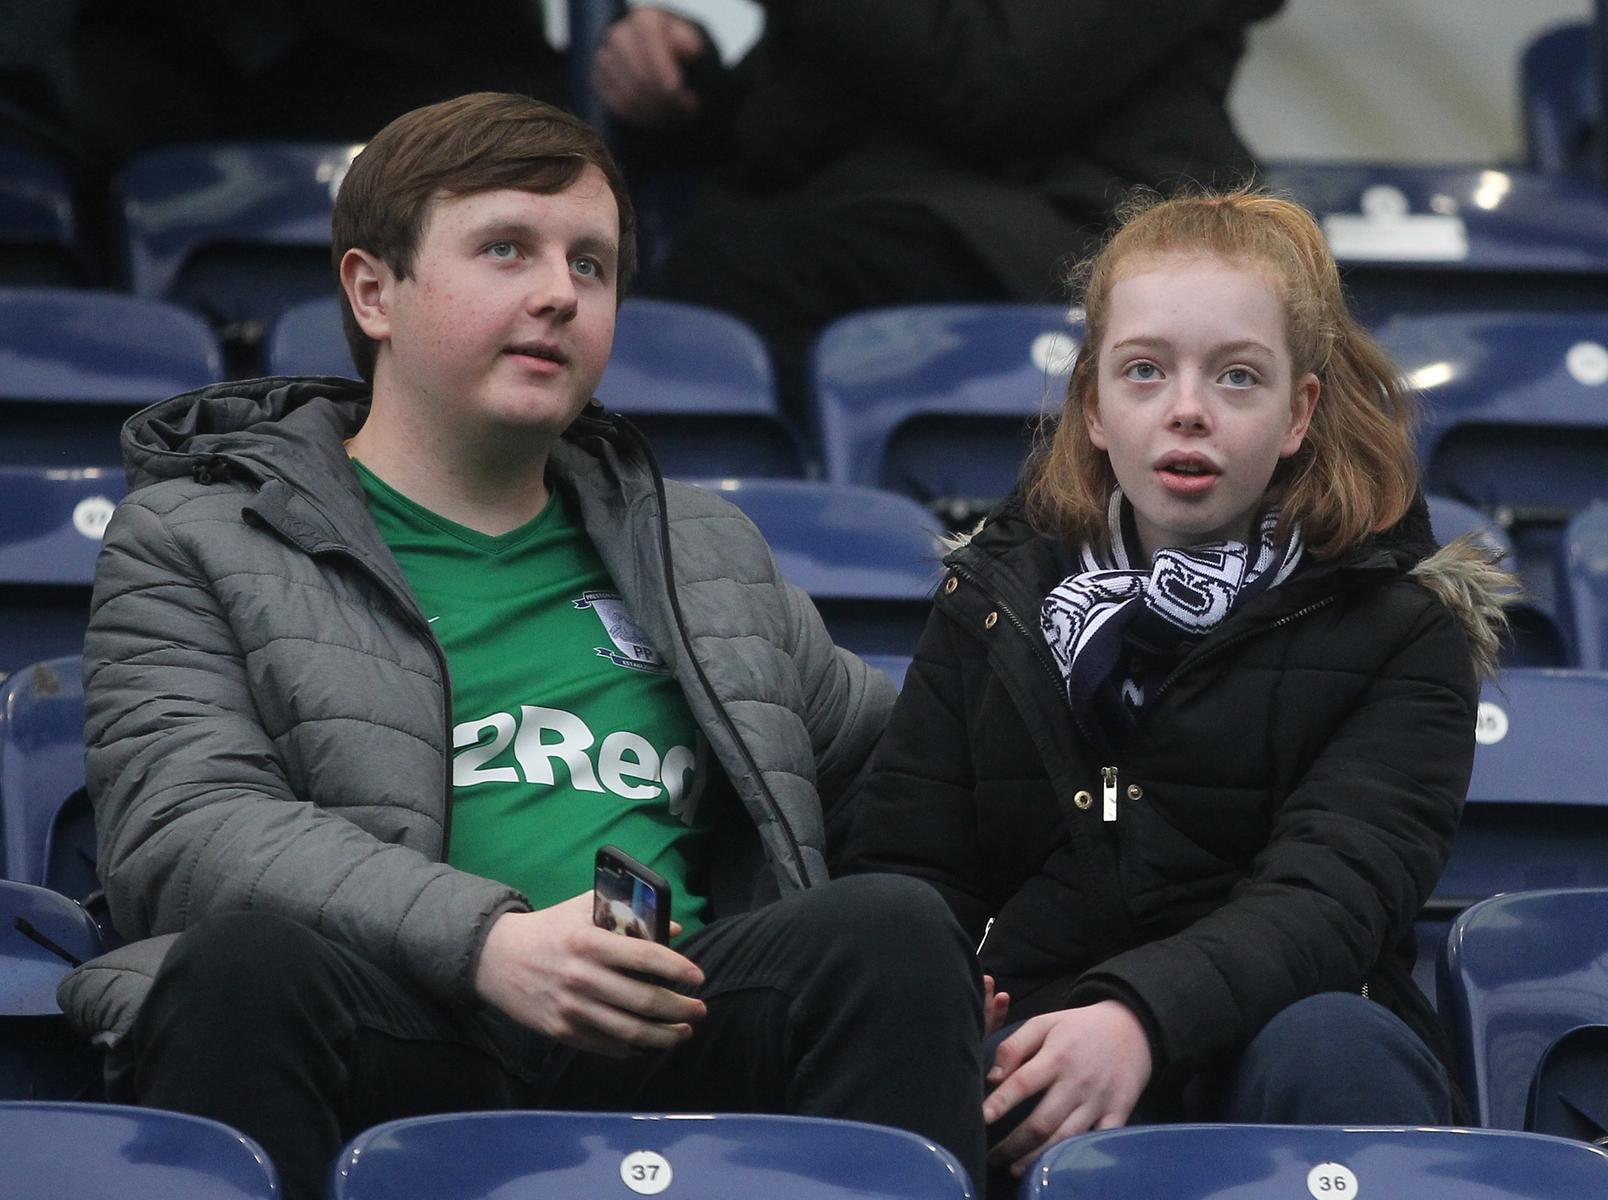 A Preston fan dons the green third kit for the home game against Millwall.